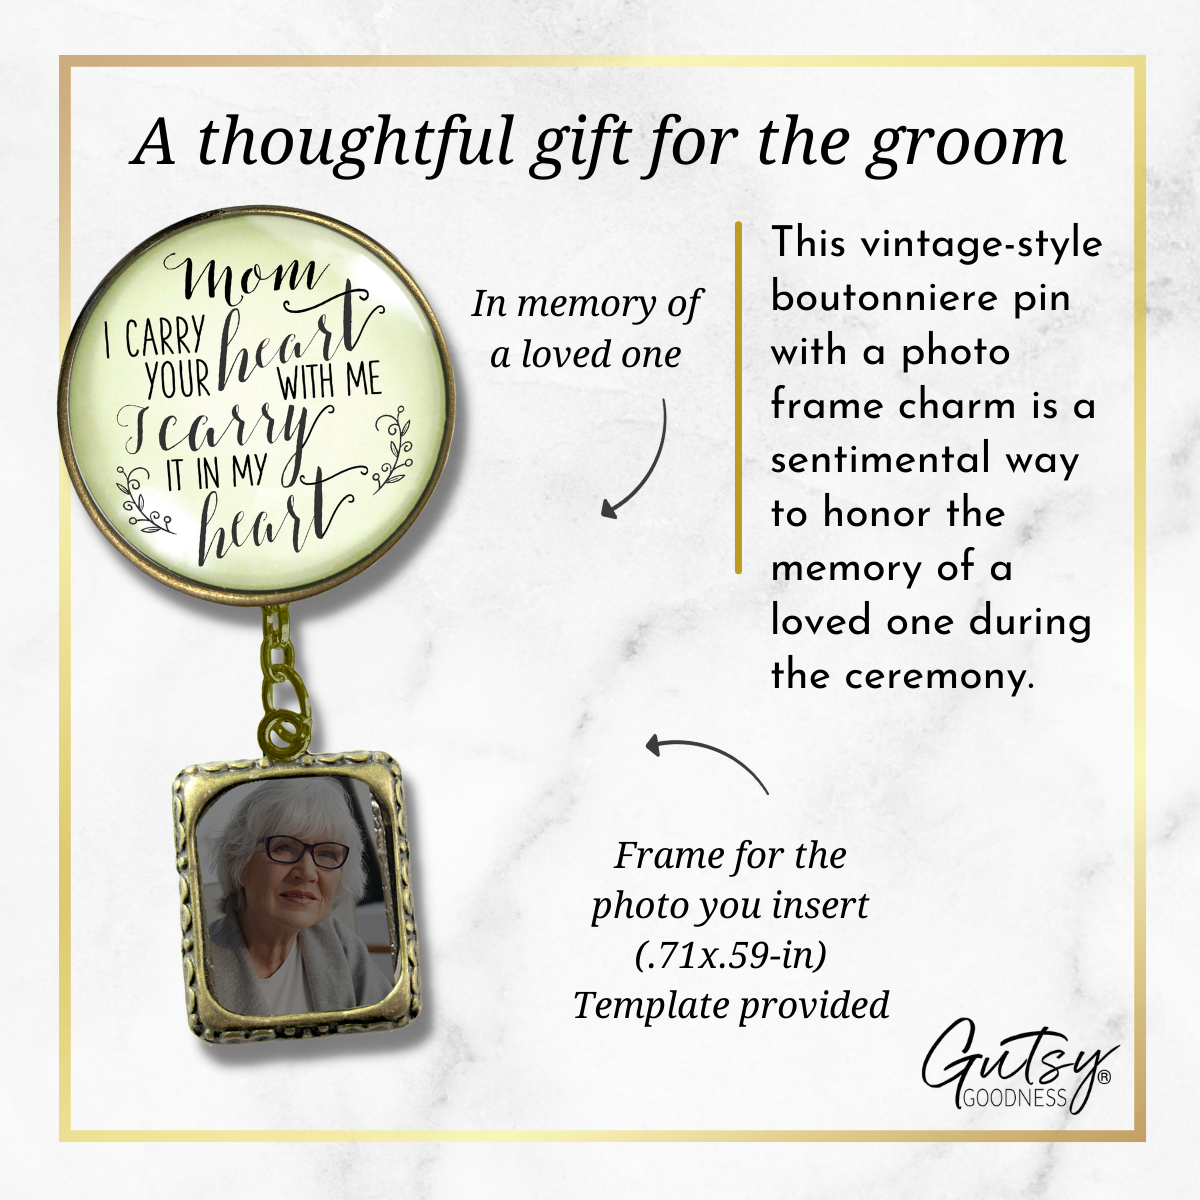 Wedding Memorial Boutonniere Pin Photo Frame Honor Mom Carry Heart Vintage Cream - Gutsy Goodness